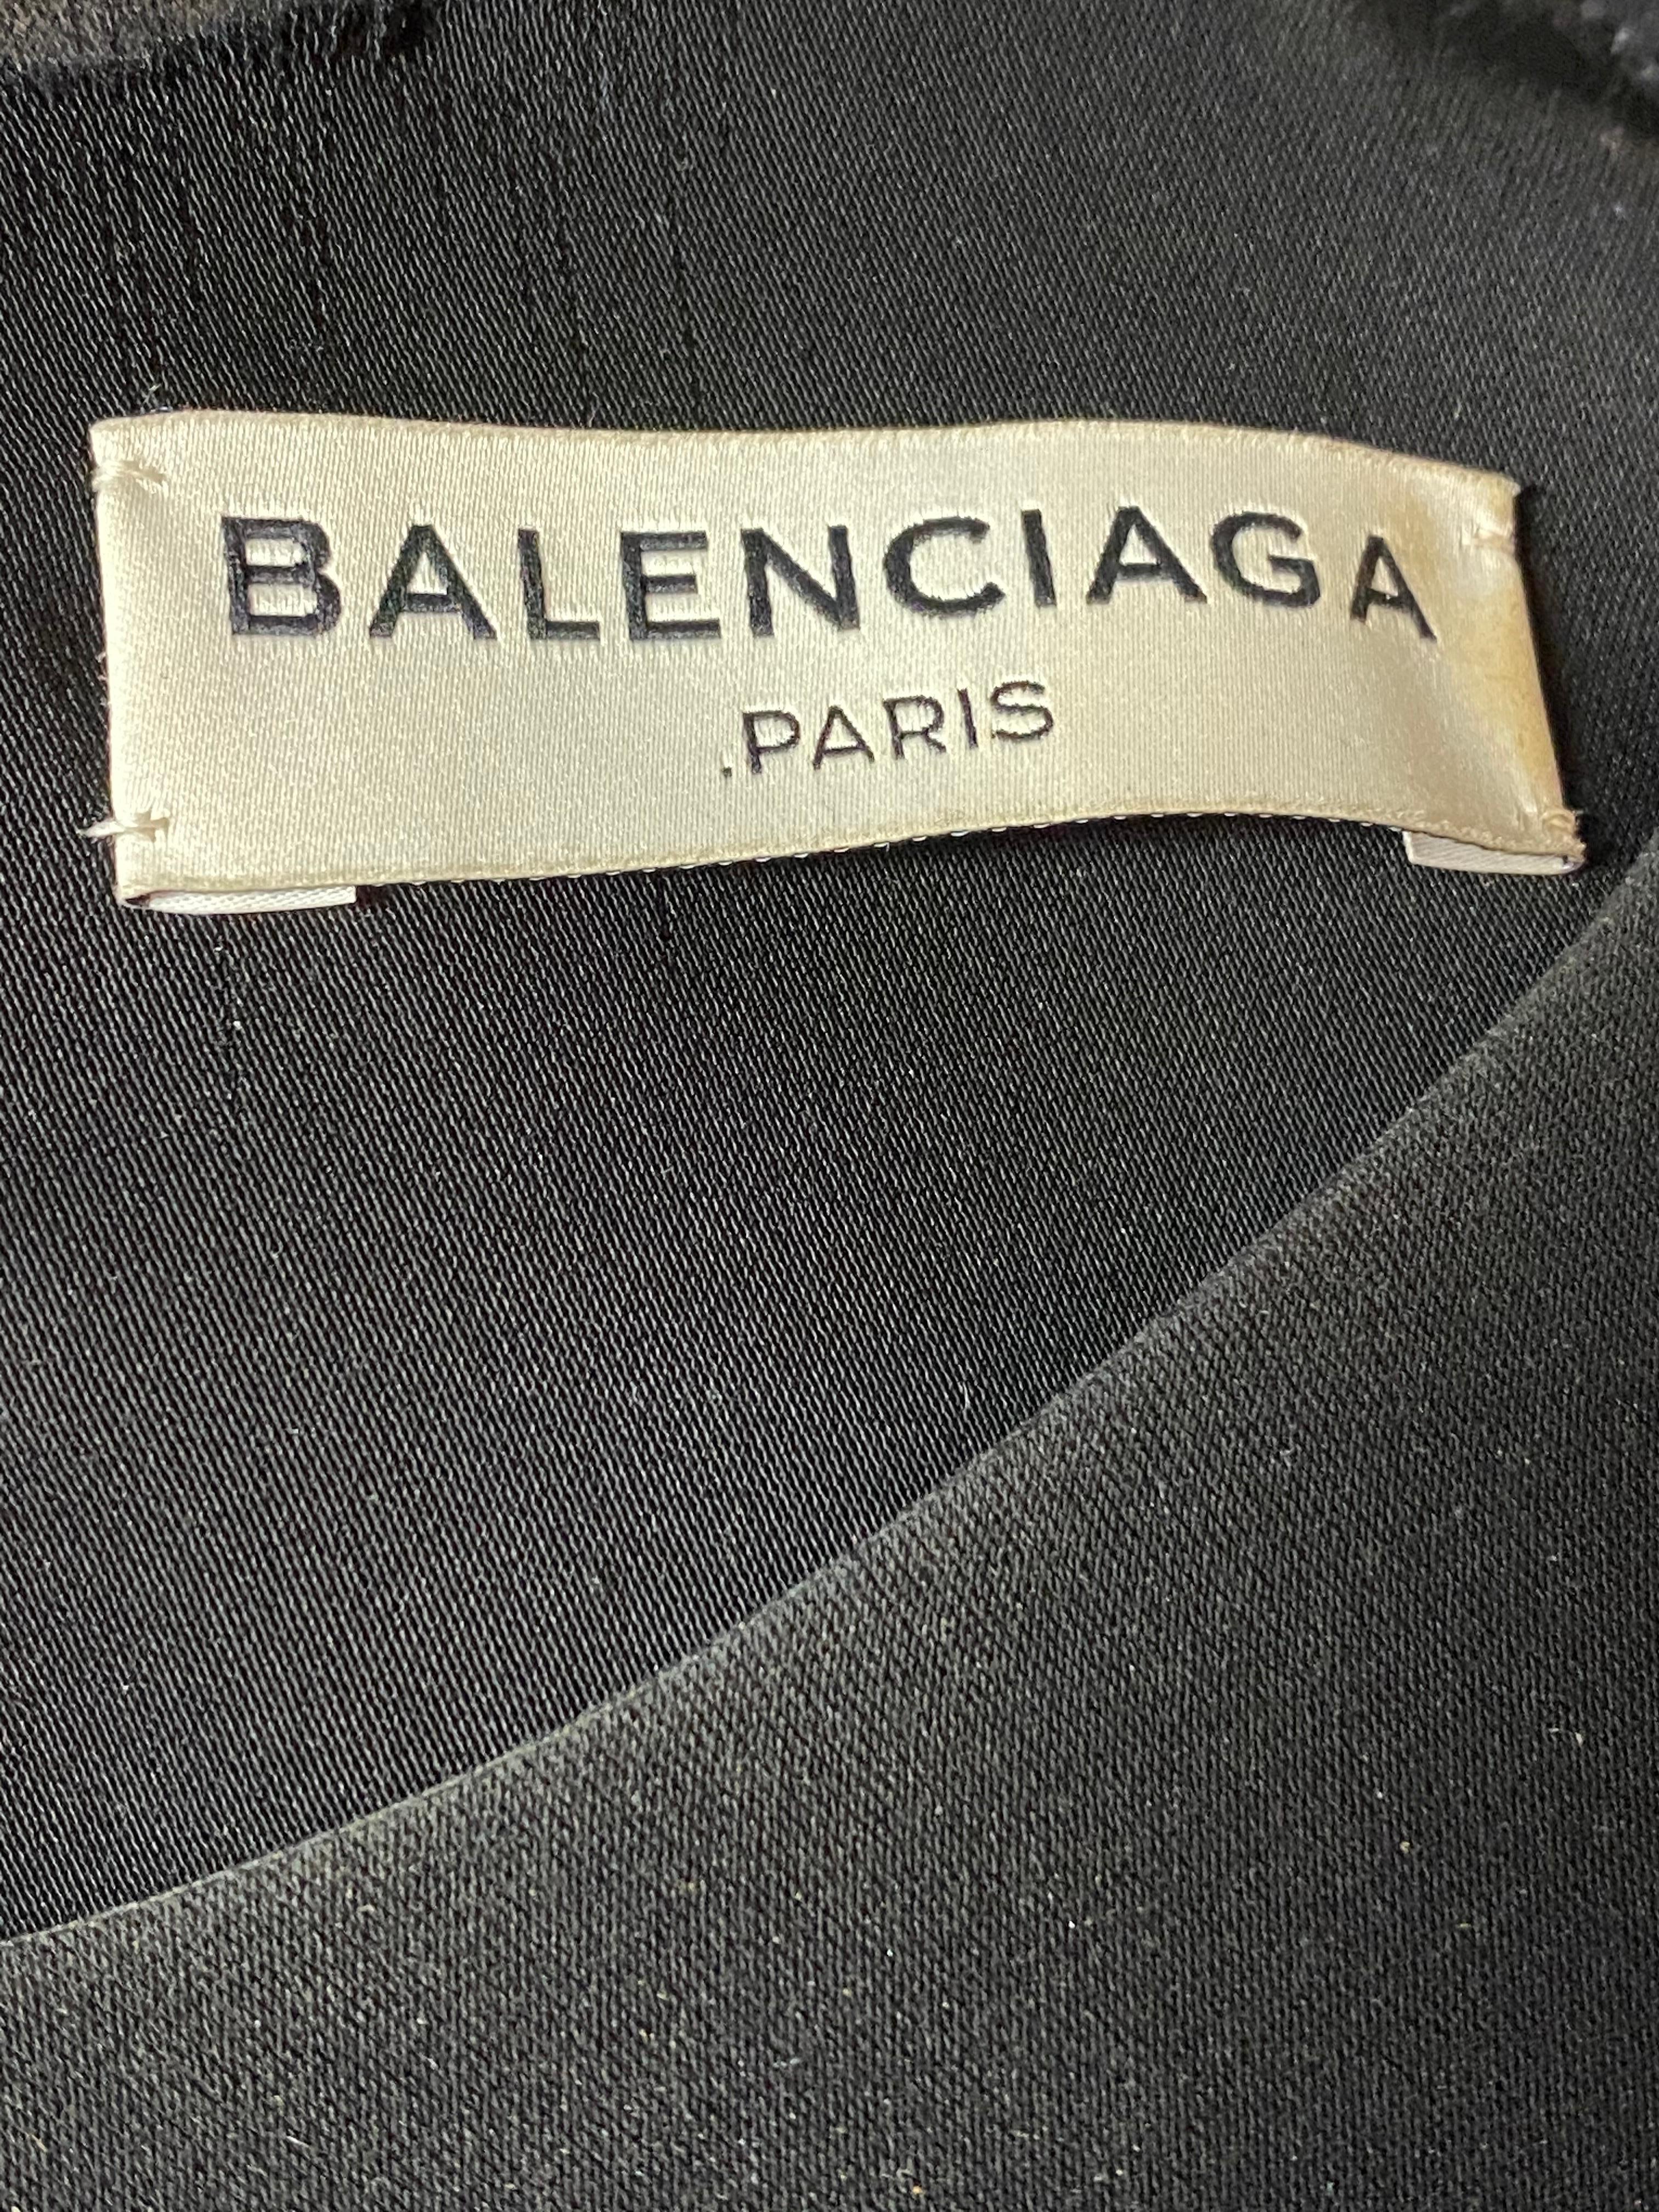 Balenciaga Paris Black Cropped Top, Size 40 In Excellent Condition For Sale In Beverly Hills, CA